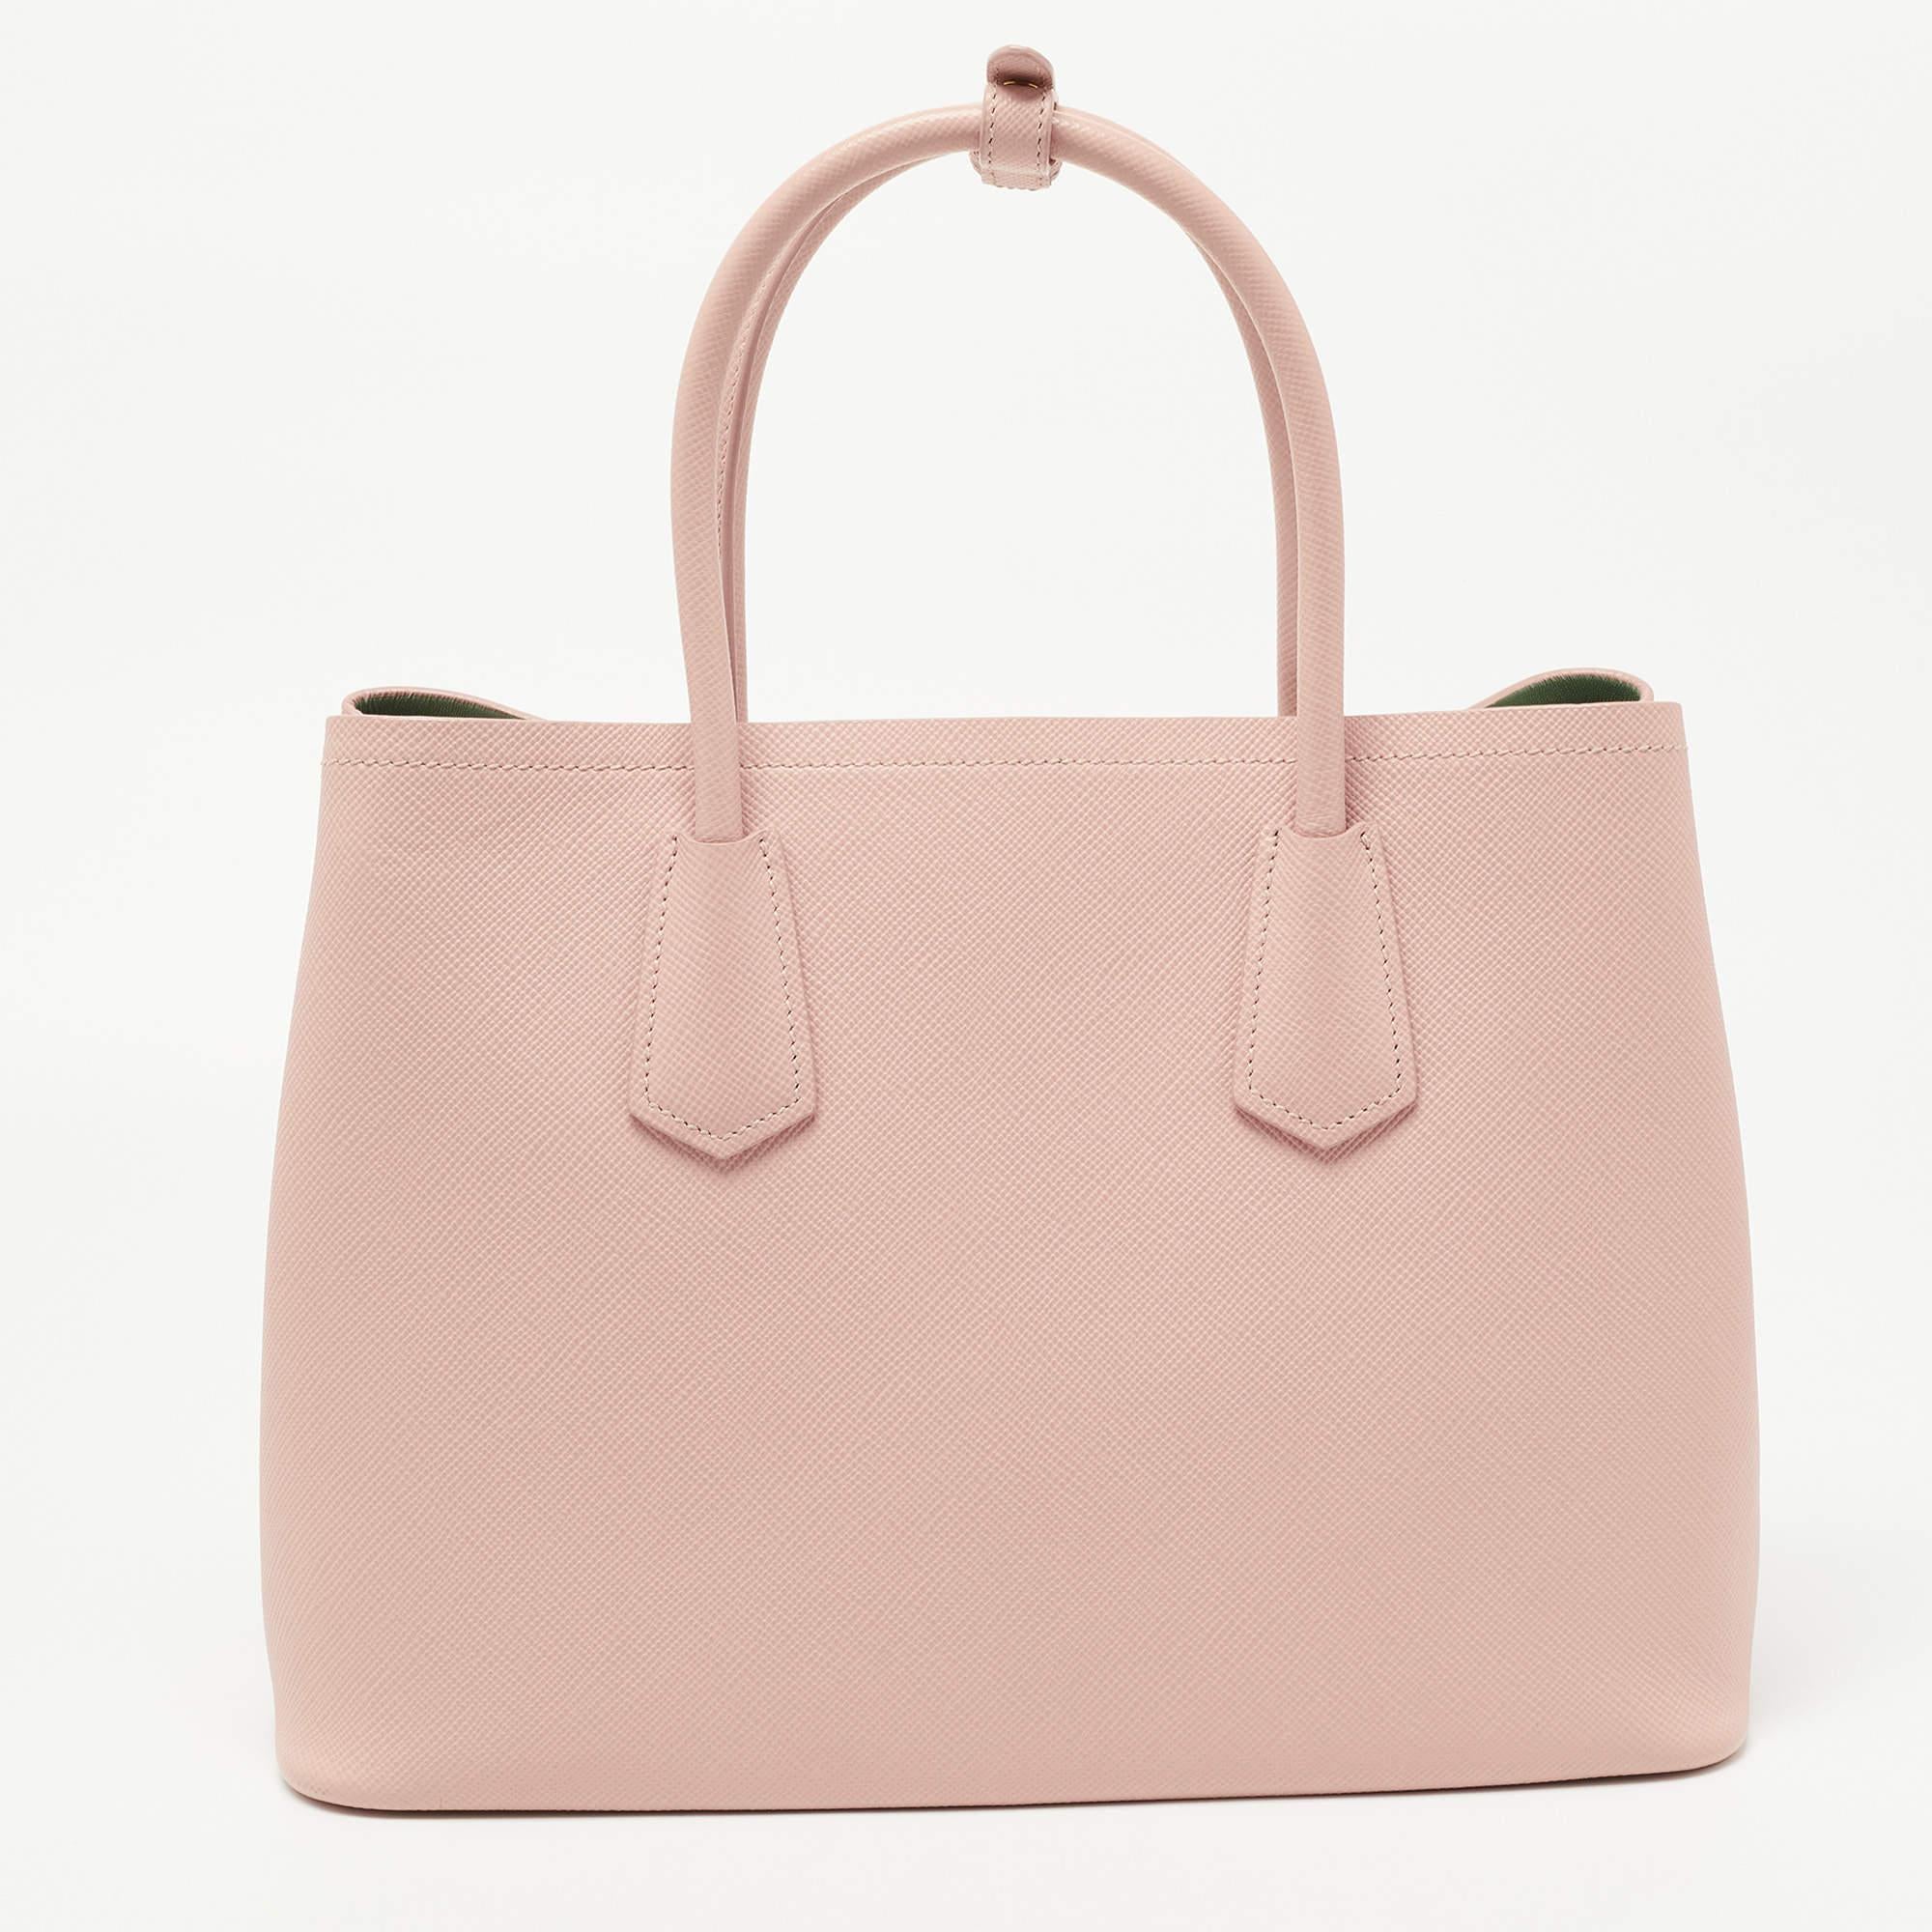 Know to create stylish, sophisticated, and timeless designs, this is a brand worth investing in. The bags that come from this label's atelier are exquisite. This Prada tote bag is no different. It has been made from quality materials and comes with